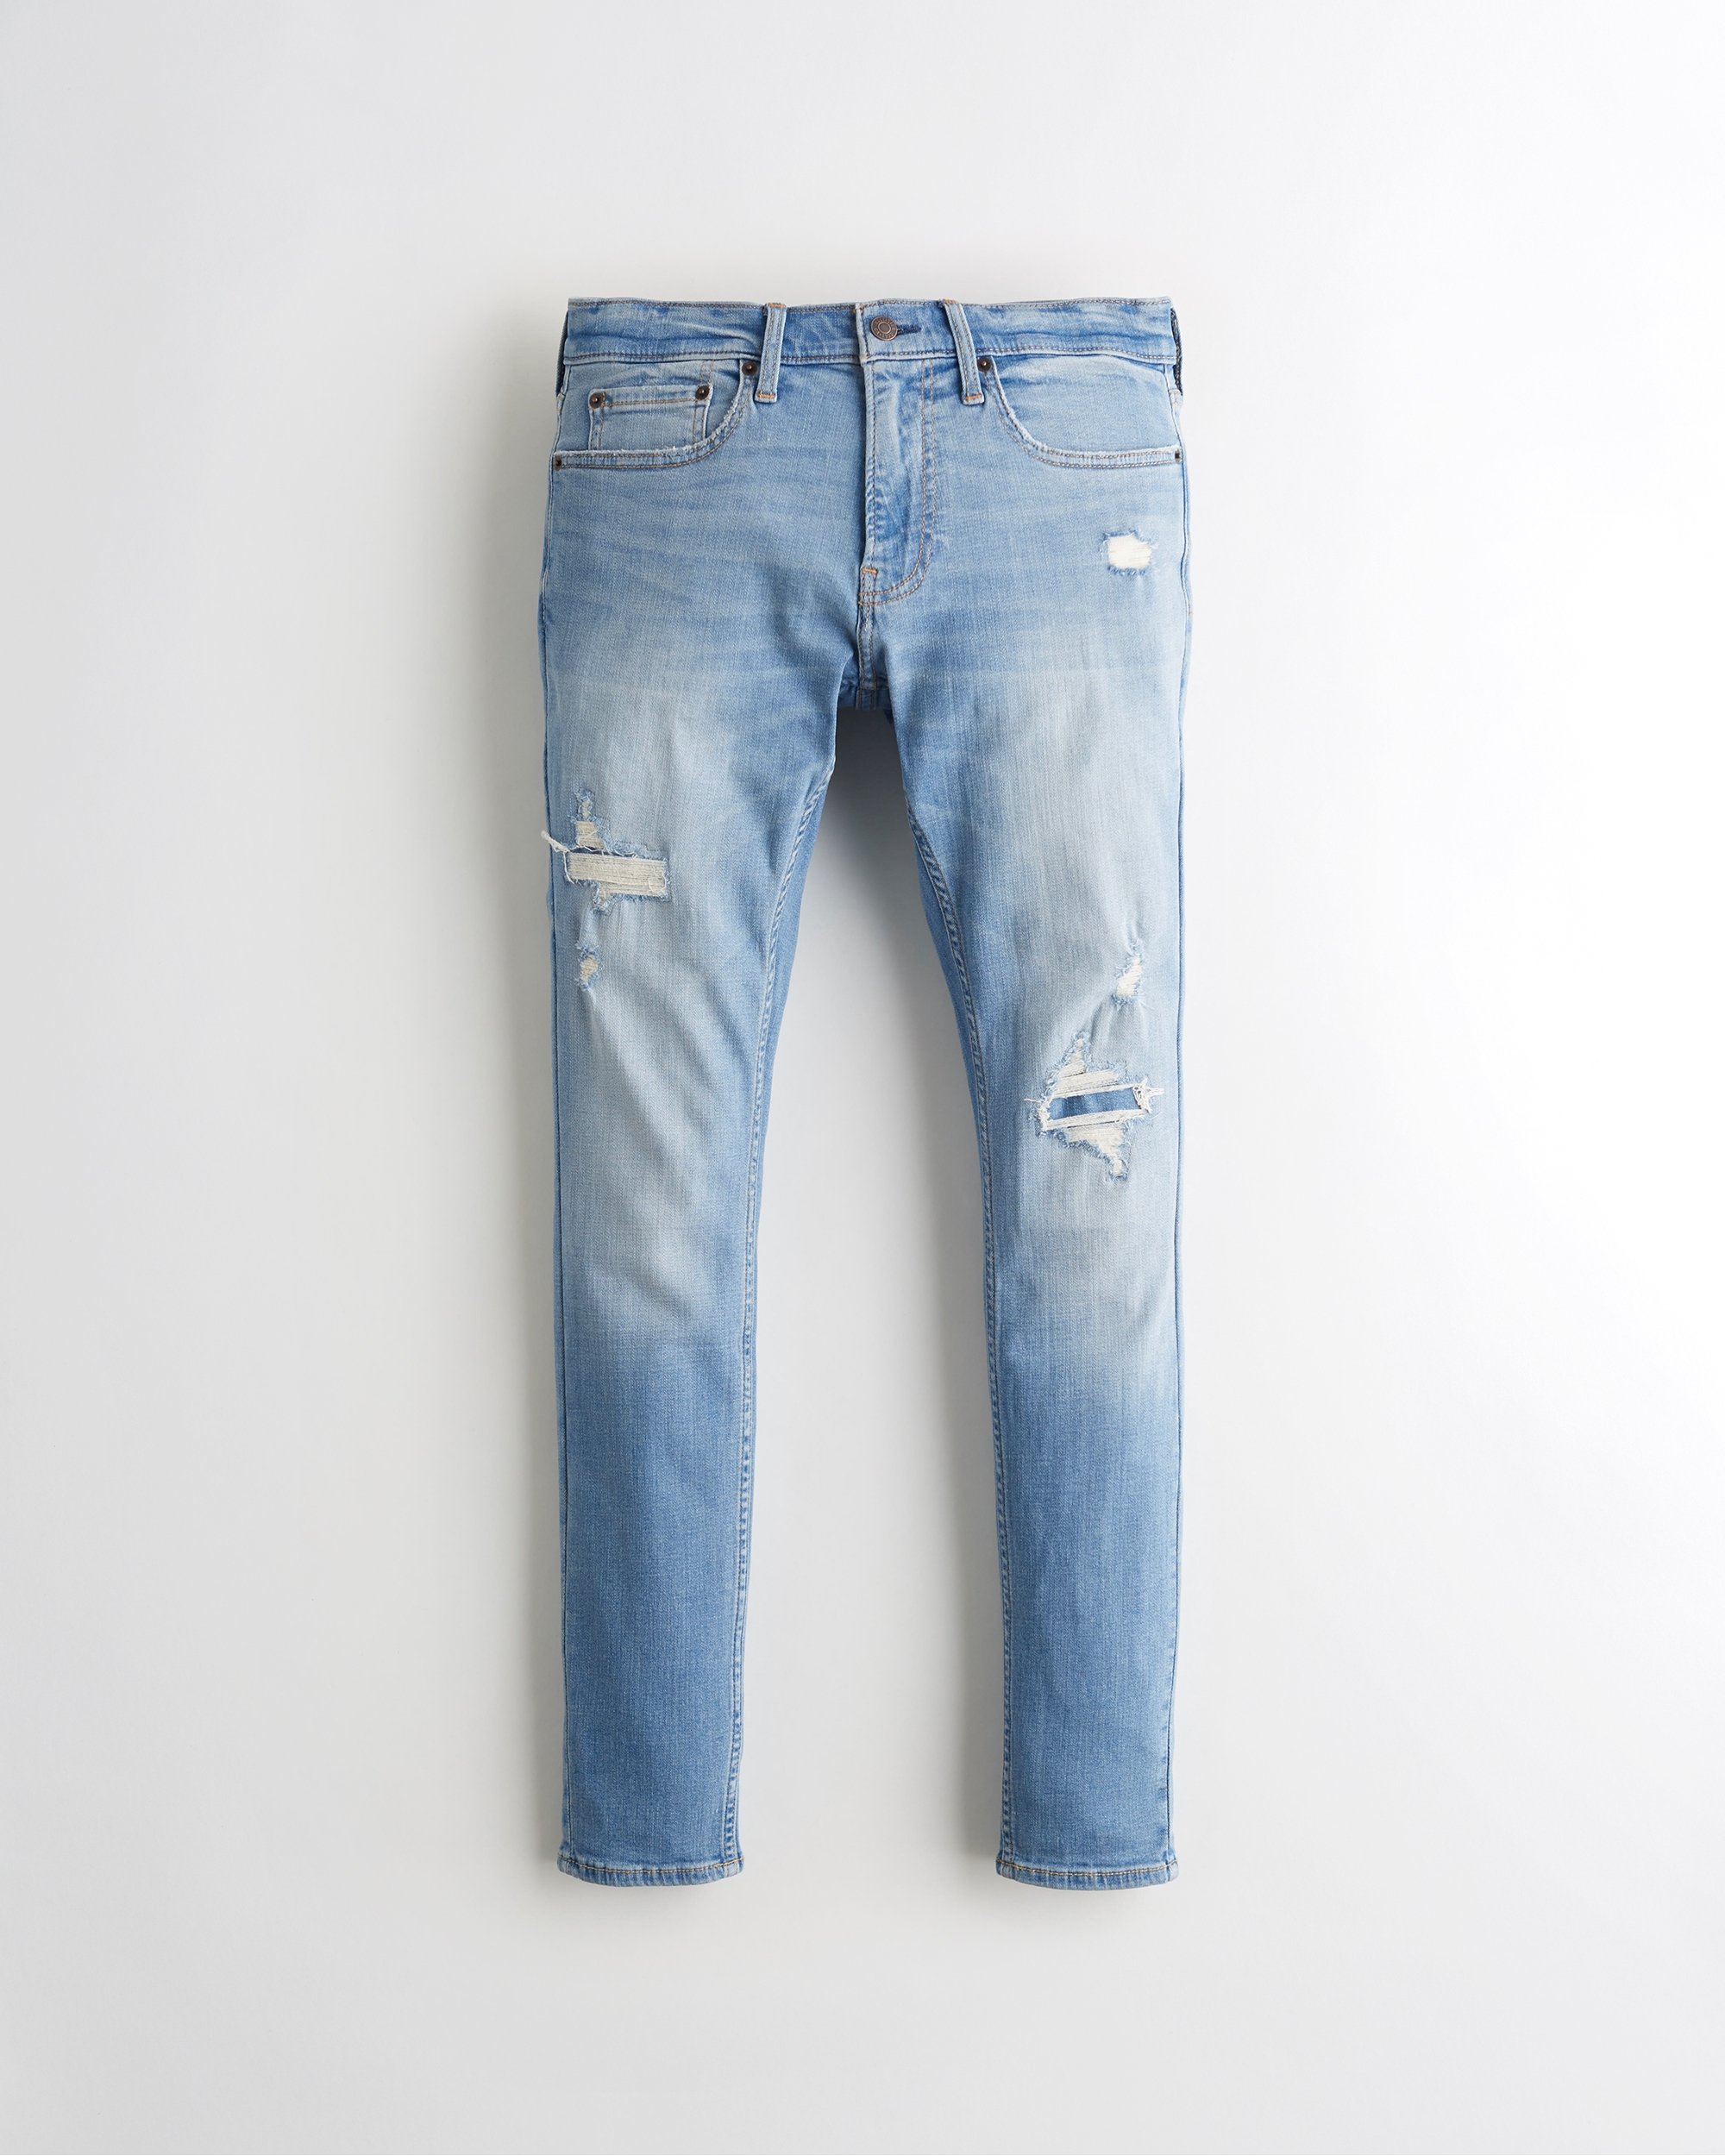 a&f extreme skinny jeans